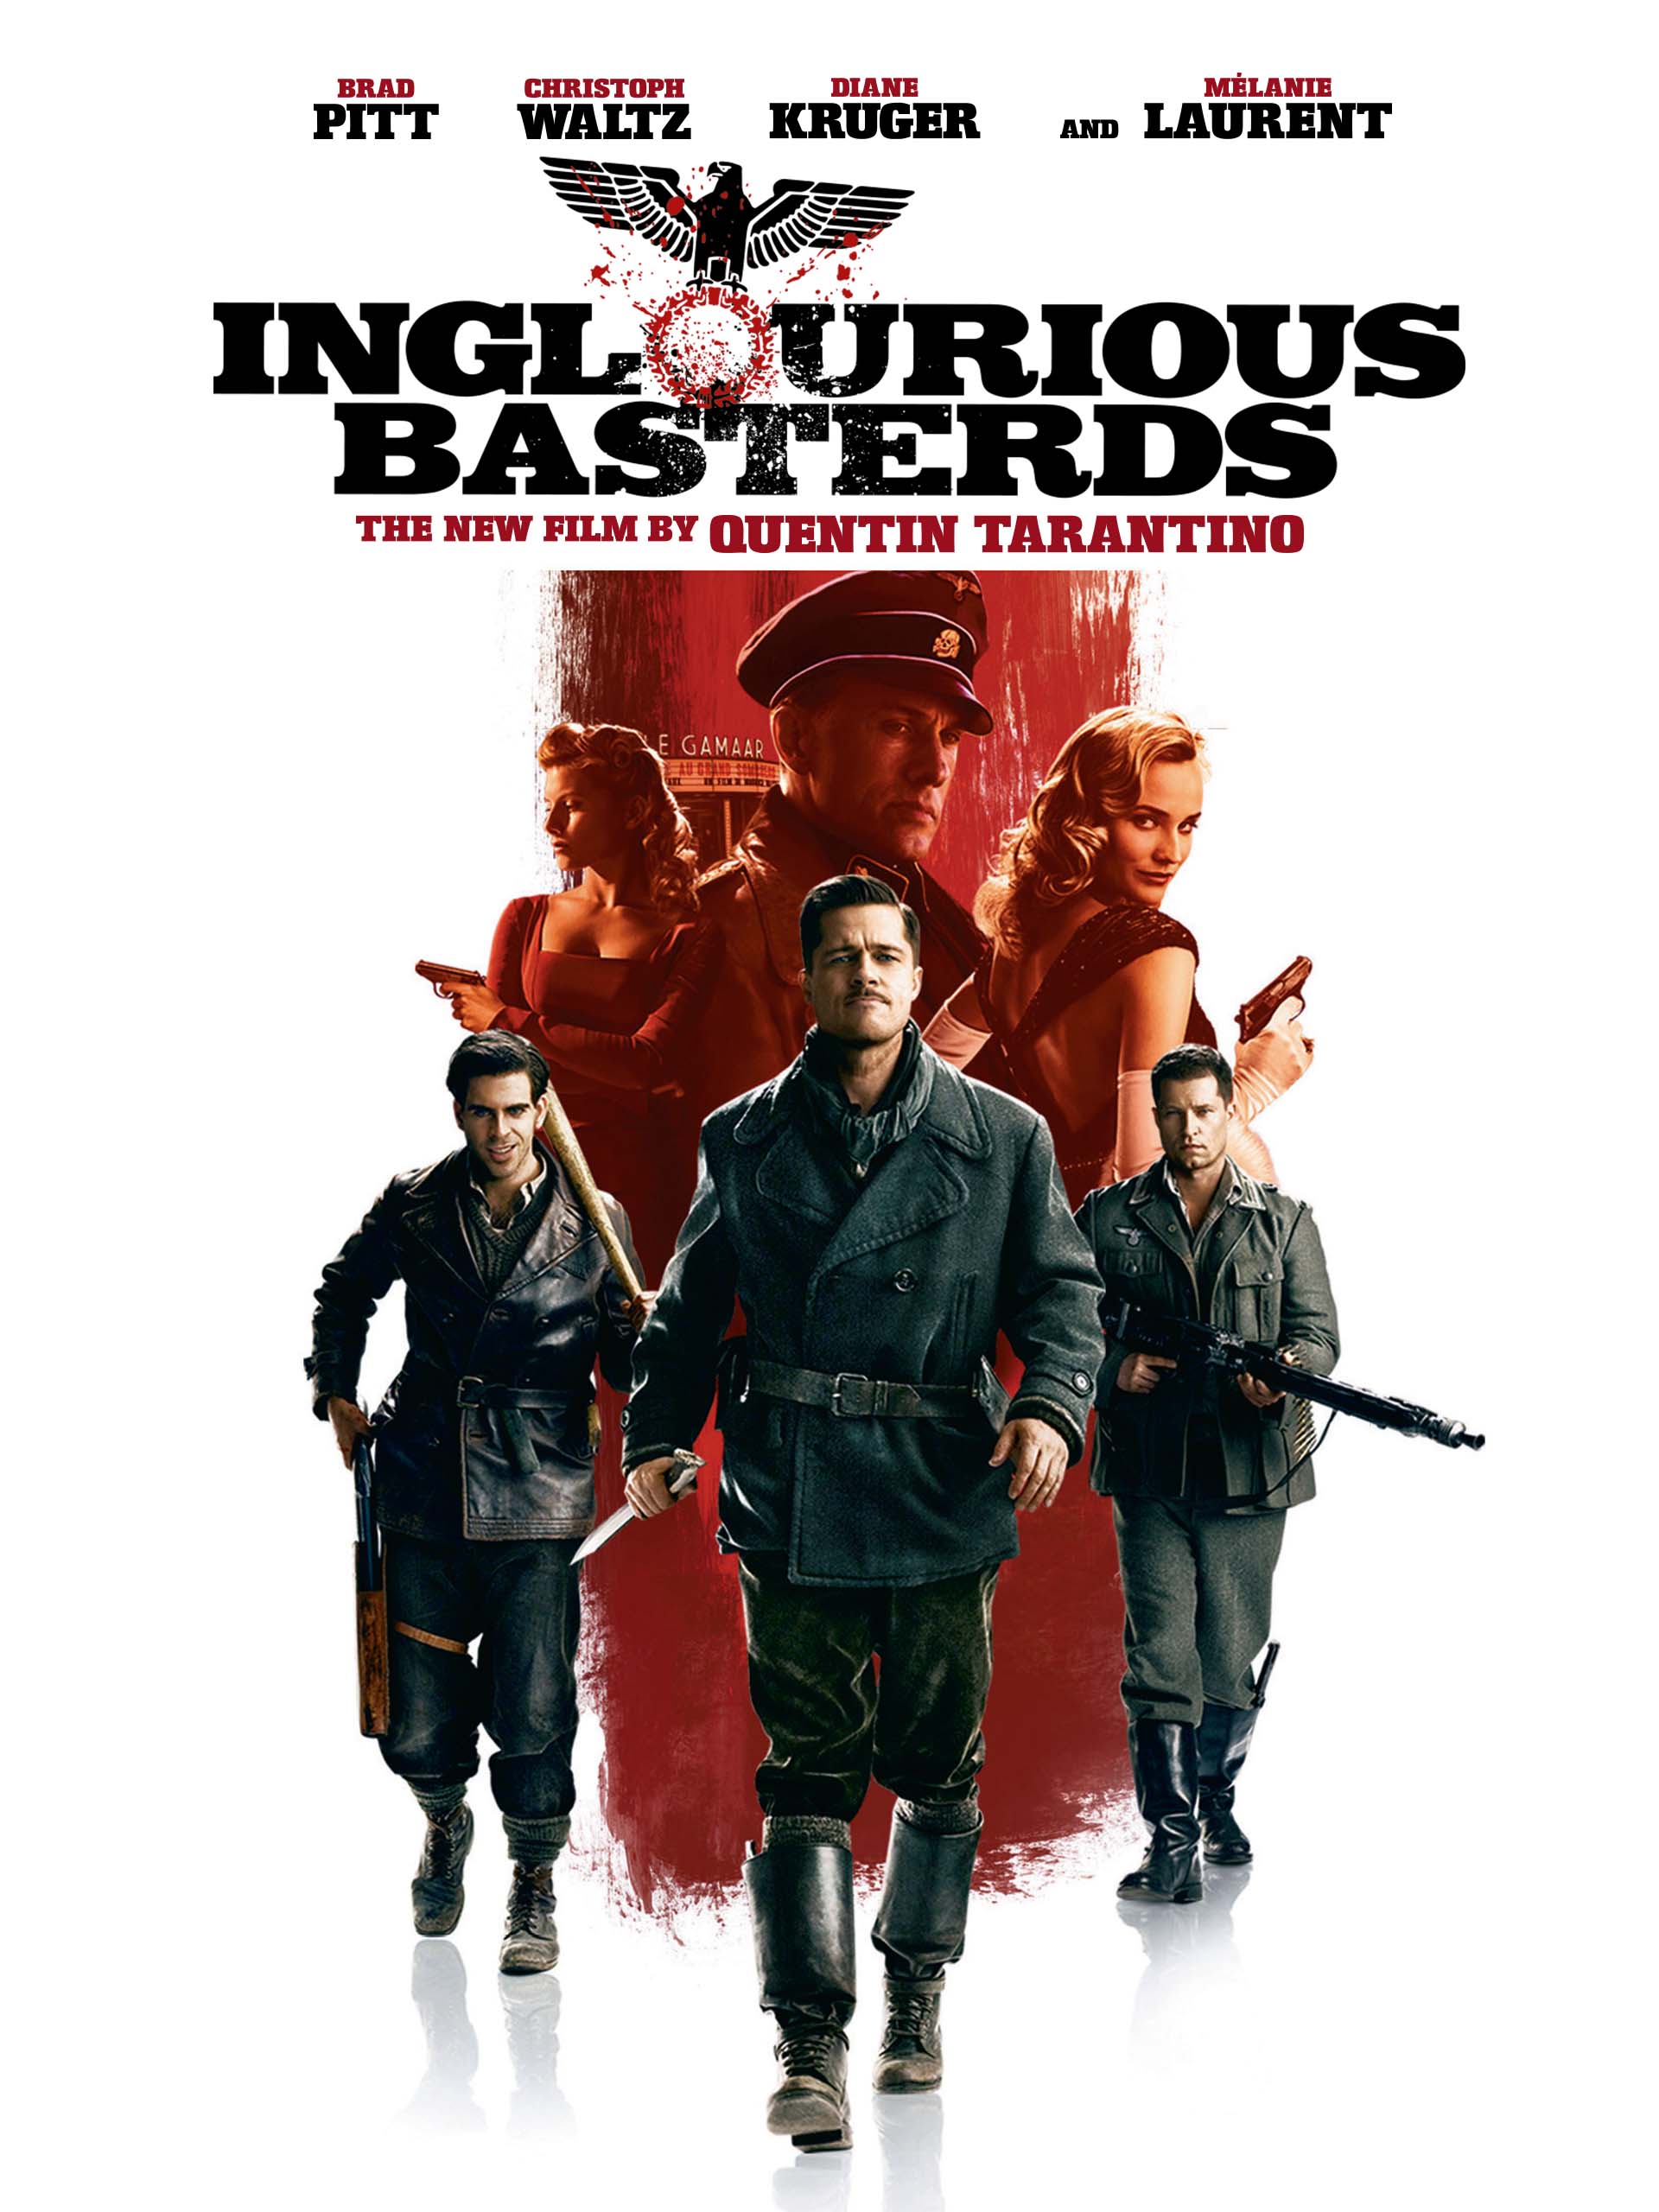 andrew flickinger recommends watch inglorious bastards online free pic